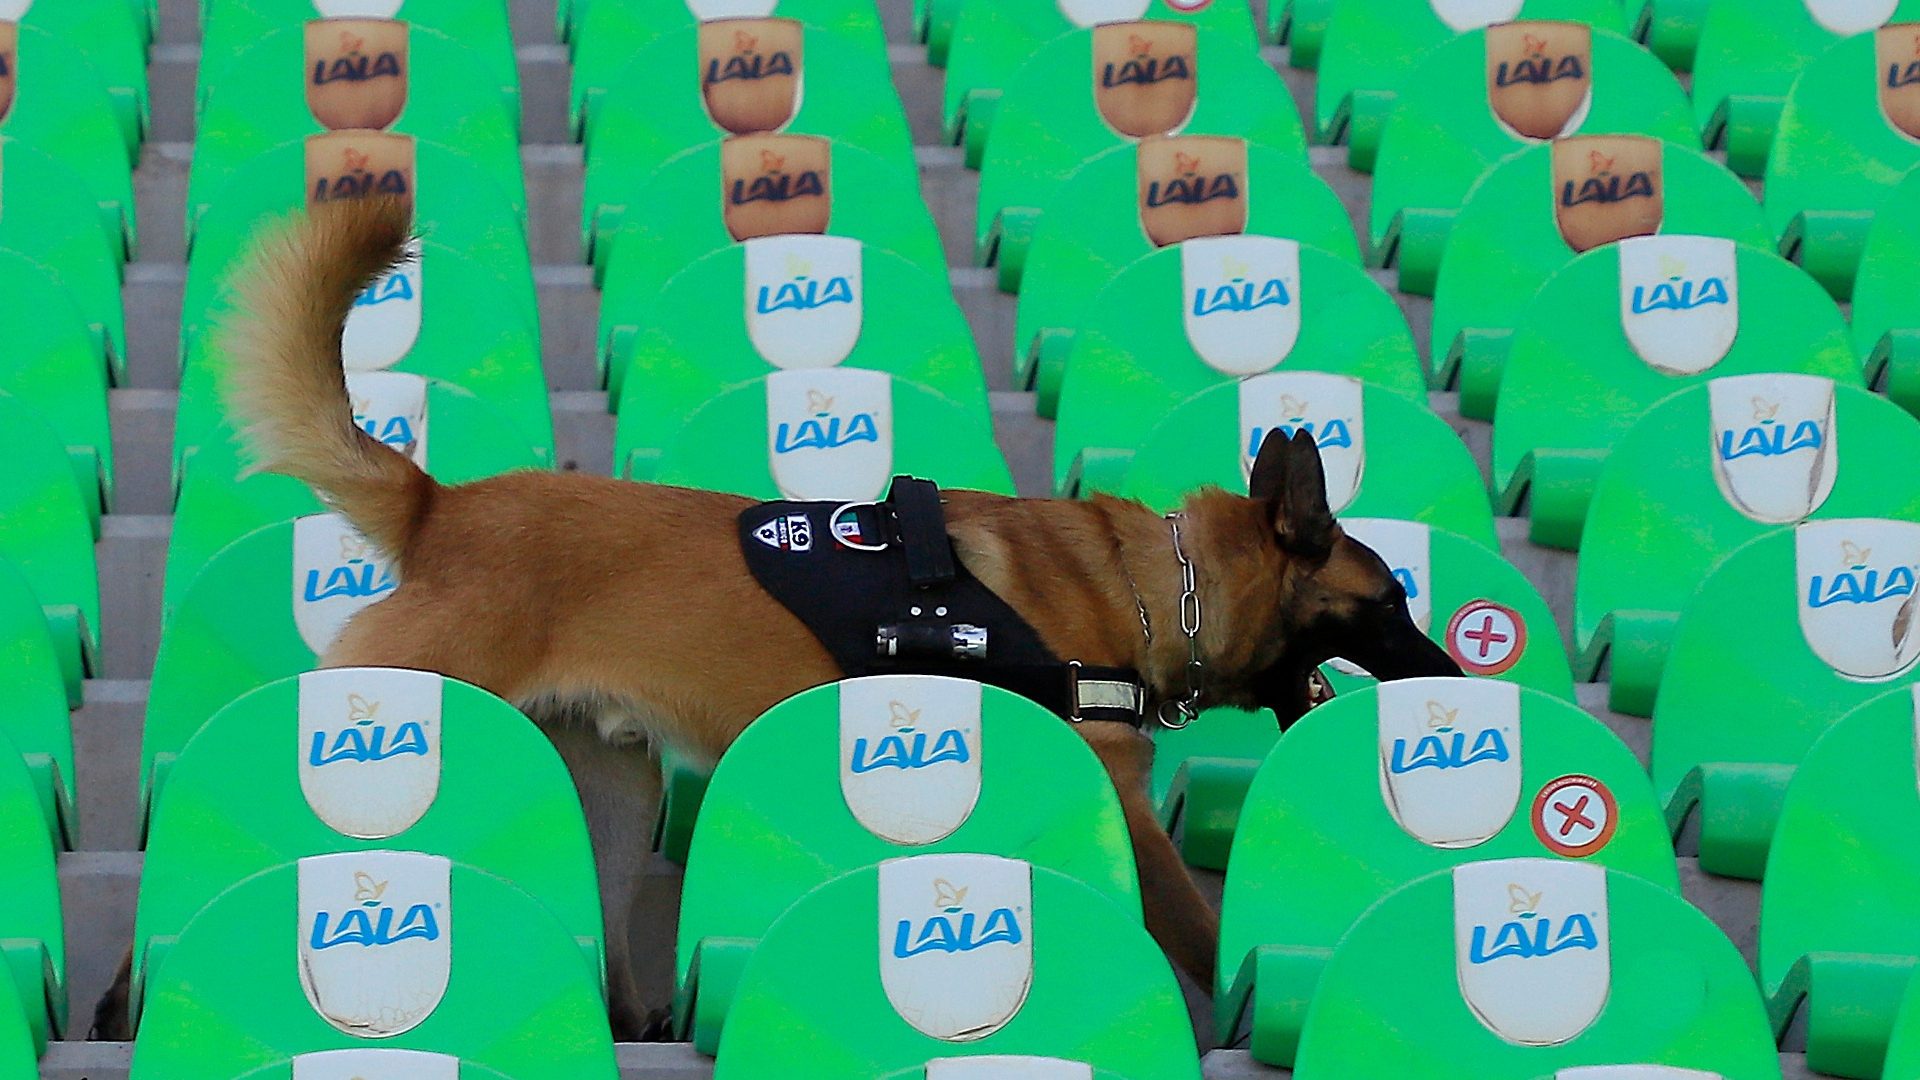 La Liga club Girona want to let dogs attend matches